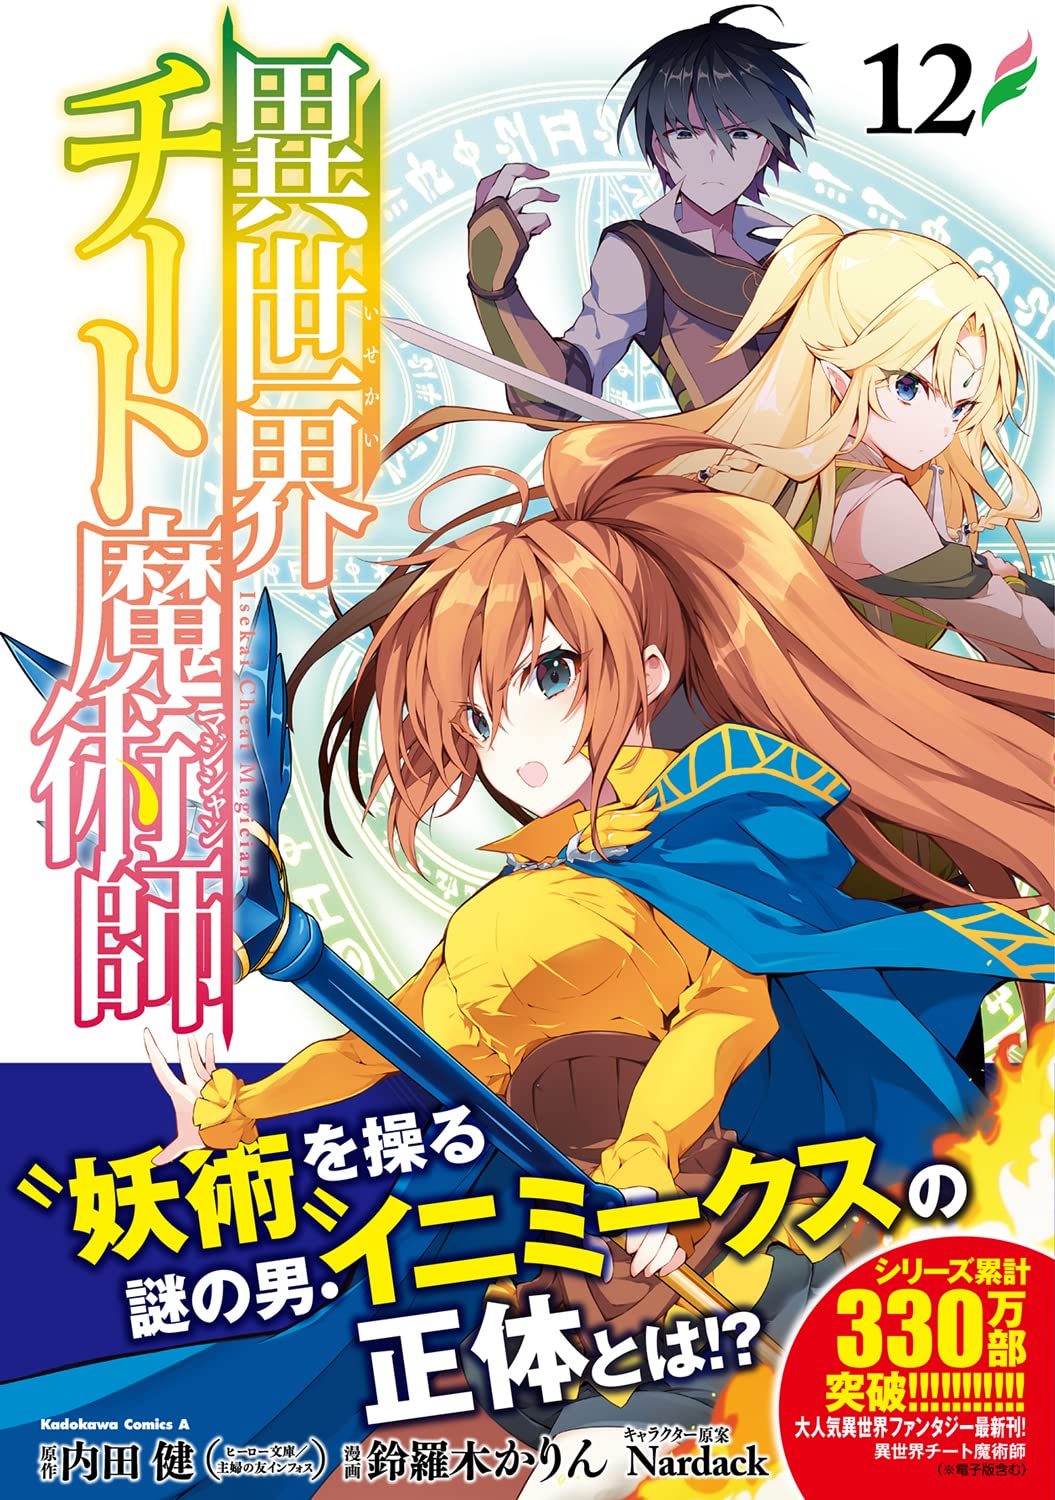 Isekai Cheat Magician Episode 12 Discussion - Forums 